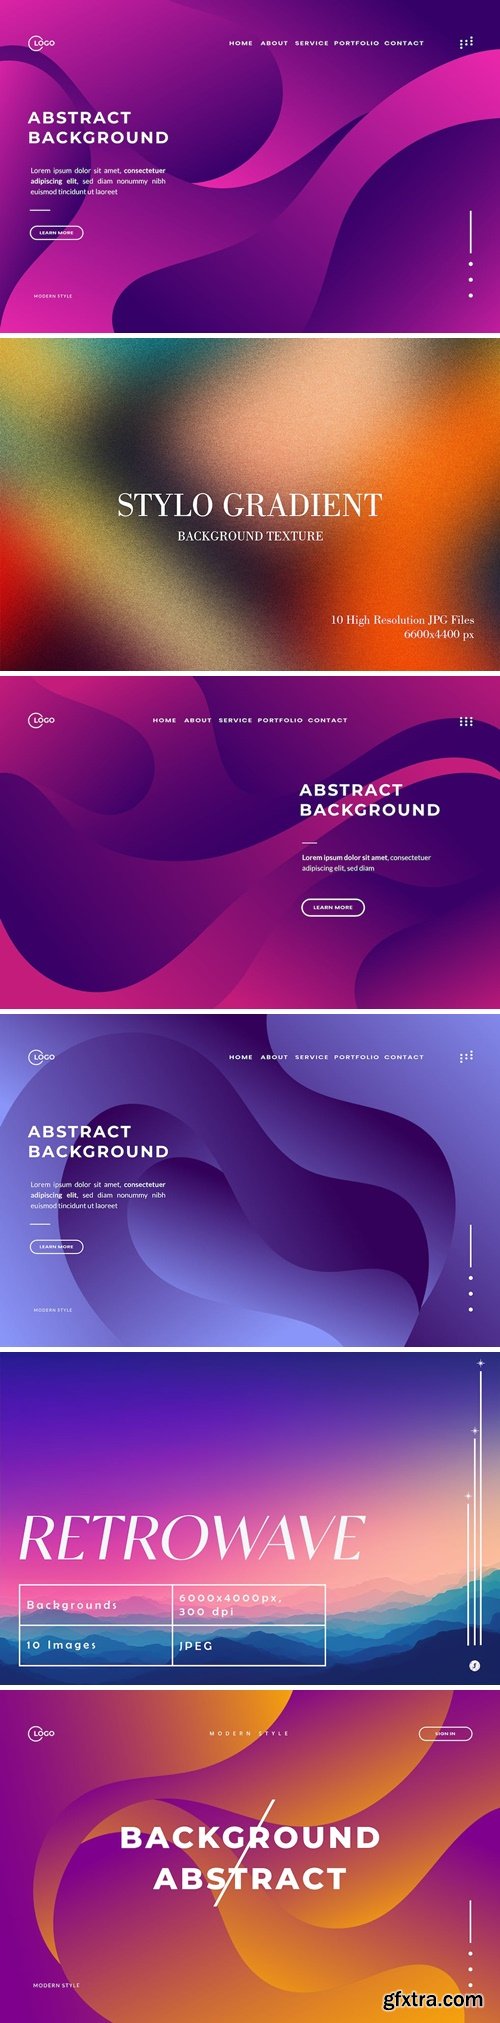 Abstract Background Bundle